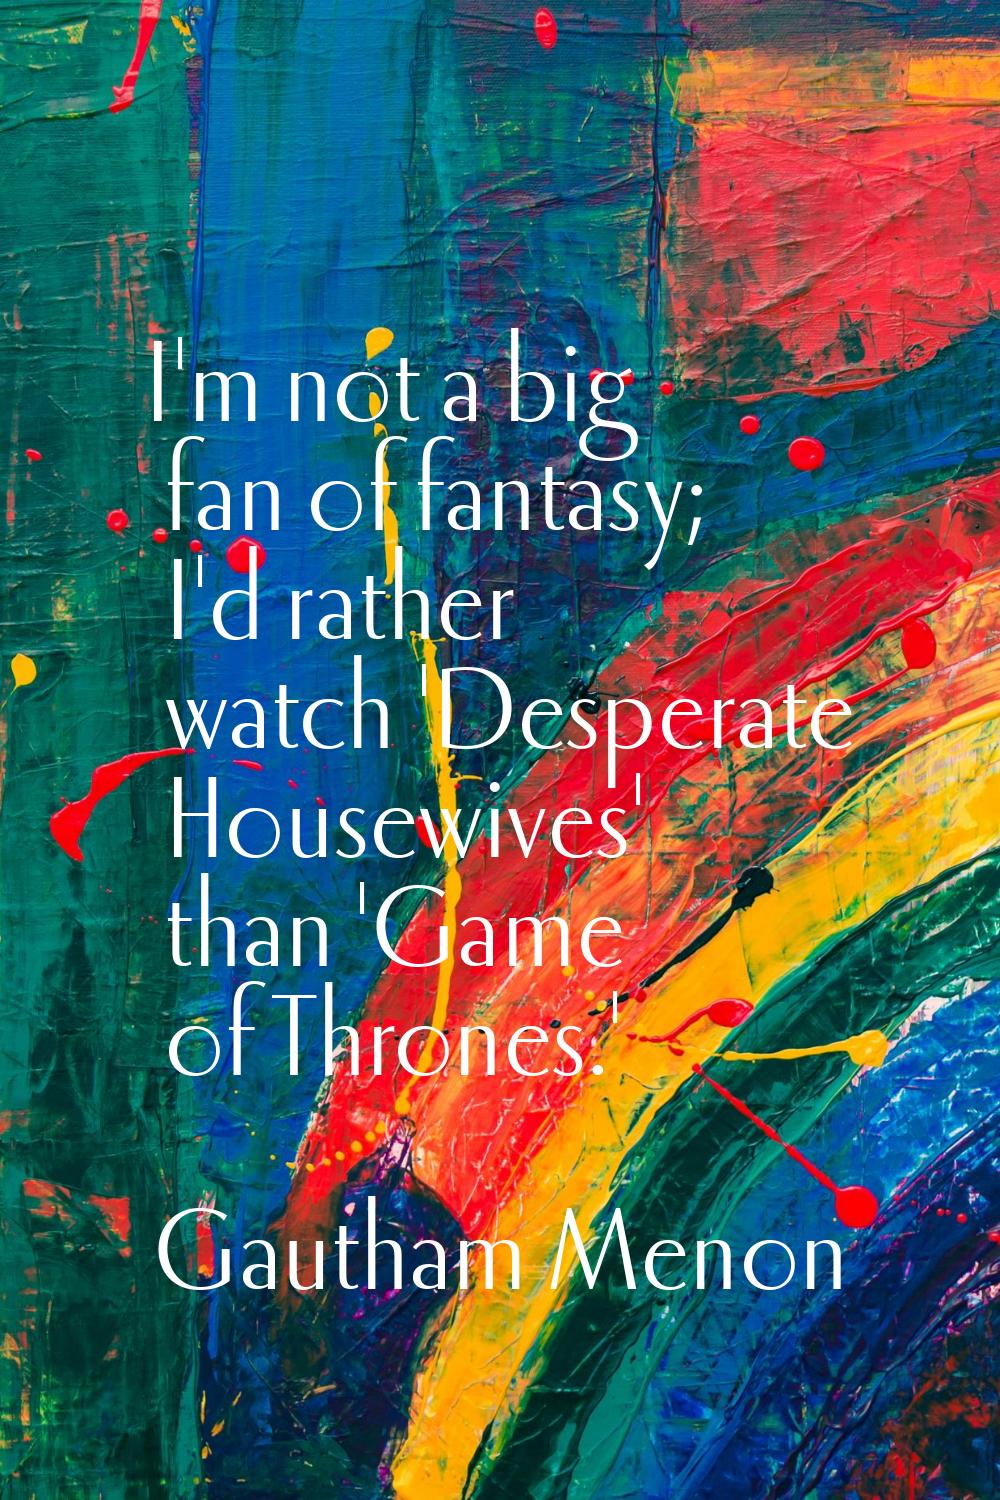 I'm not a big fan of fantasy; I'd rather watch 'Desperate Housewives' than 'Game of Thrones.'